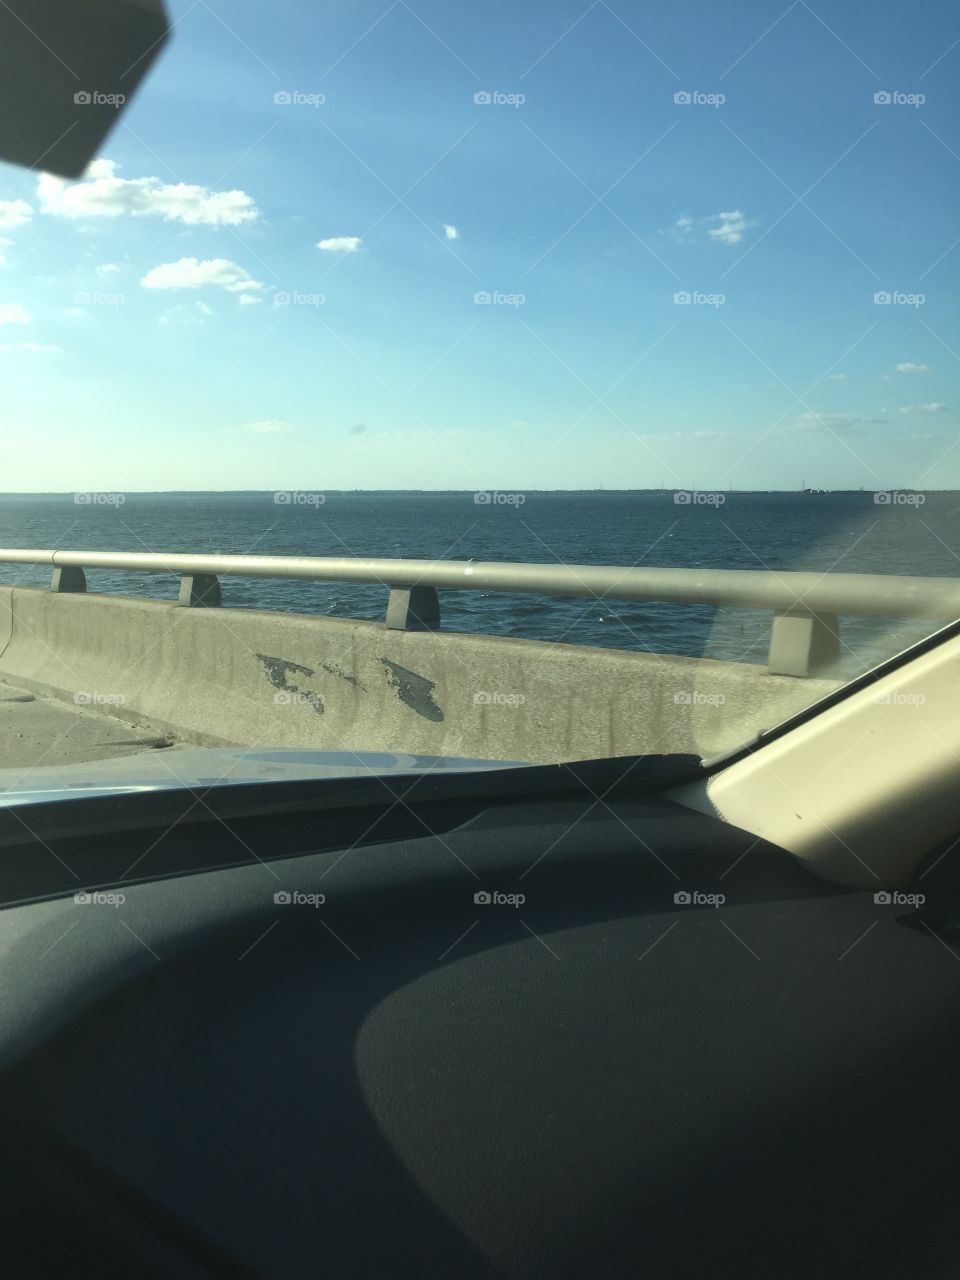 Tampa Bay from Courtney Campbell Causeway 